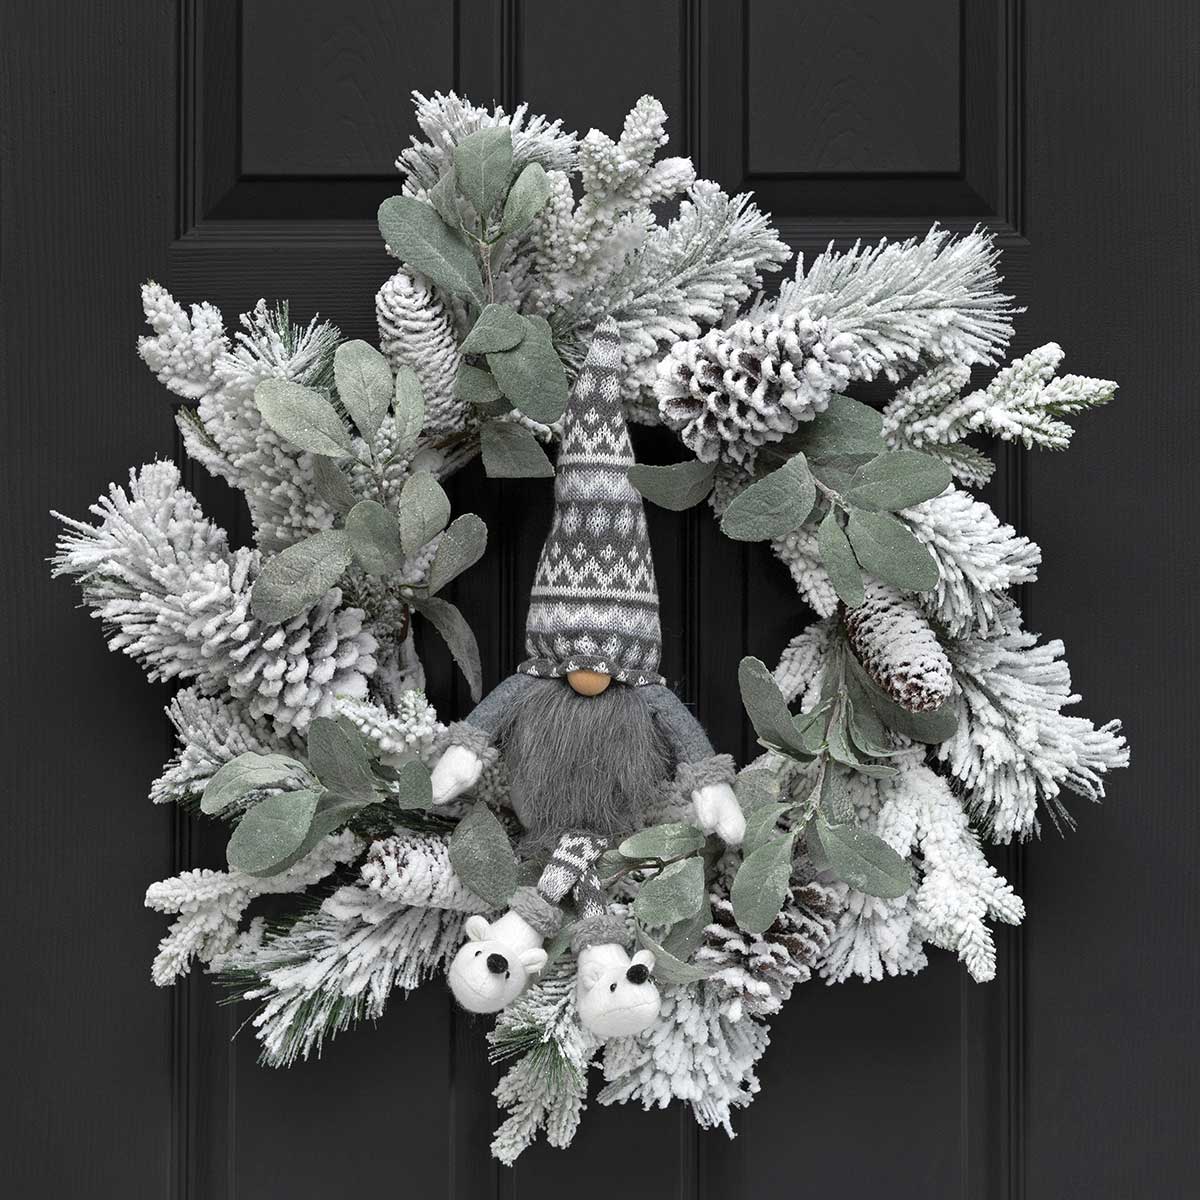 WREATH SNOWDRIFT PINE PINECONE 24IN (INNER RING 10IN) - Click Image to Close